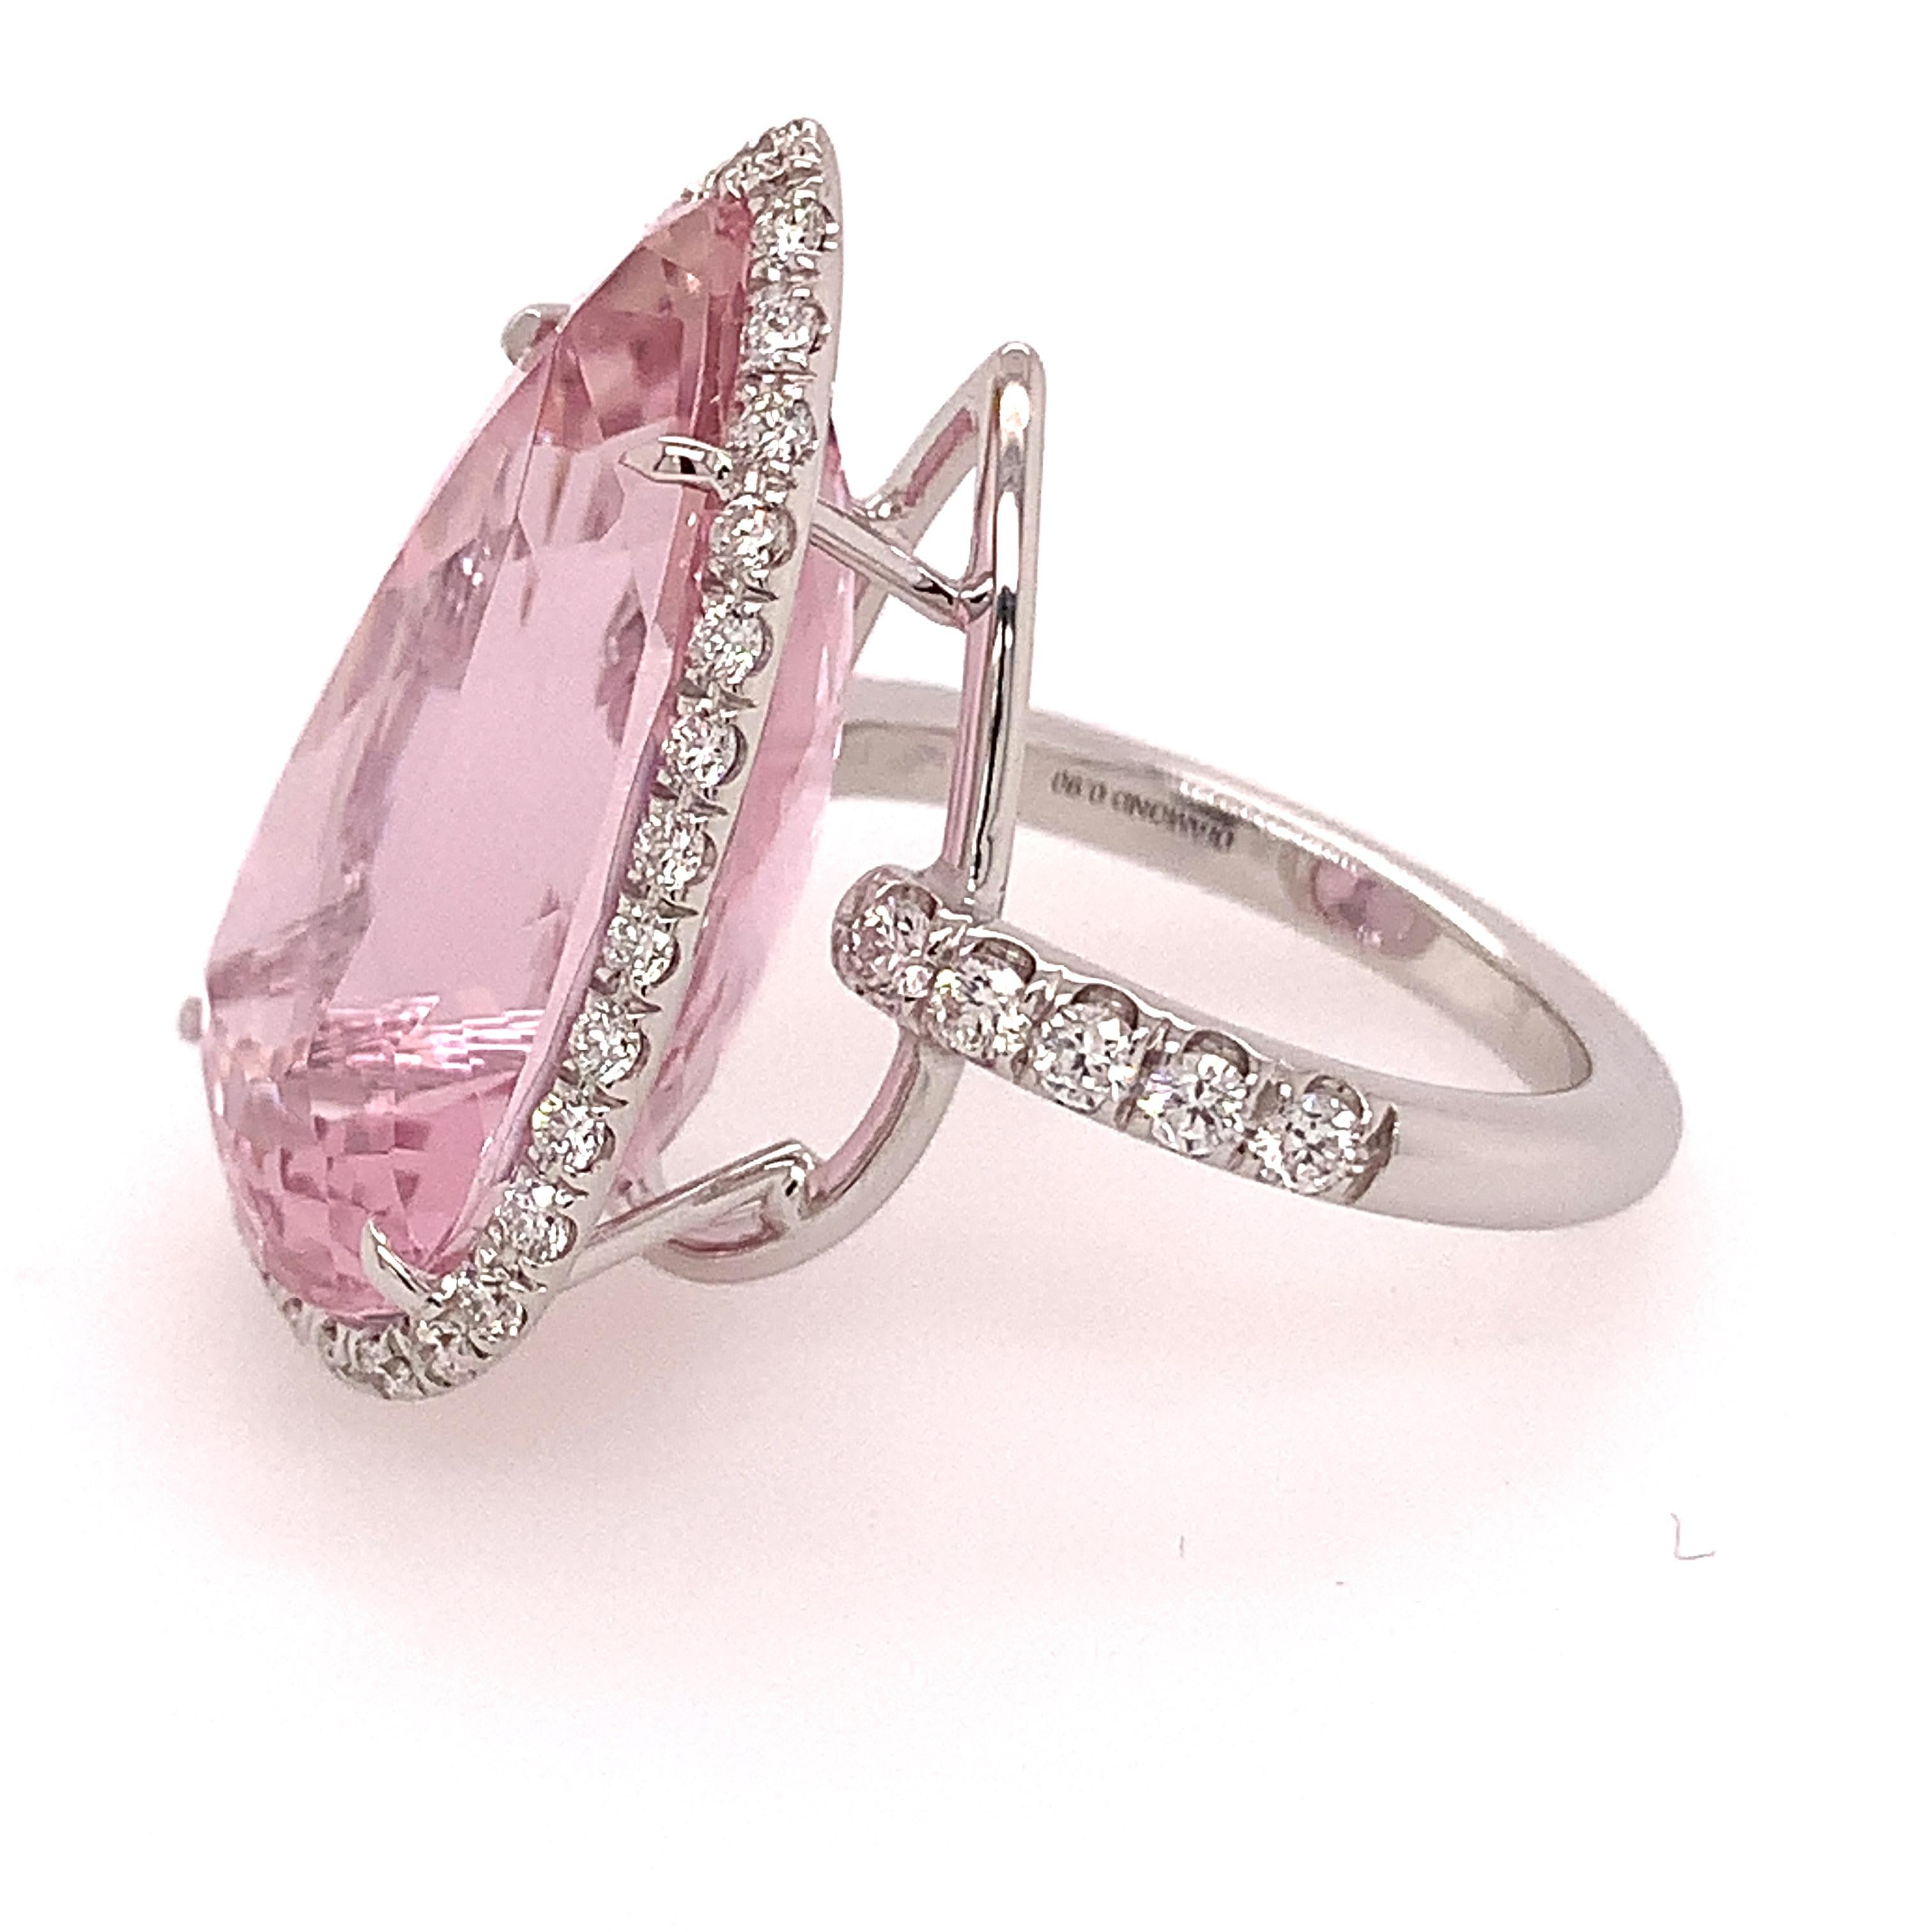 On sale on First Dibs only for 3 week.  This beautiful ring is a stunning piece created in Valenza.  18kt white gold grs 6,80  a beautiful pearshape kunzite ct 22,47 ,  and white diamonds  ct 0,90
Made In Italy in Valenza. 
Dont miss a special sale